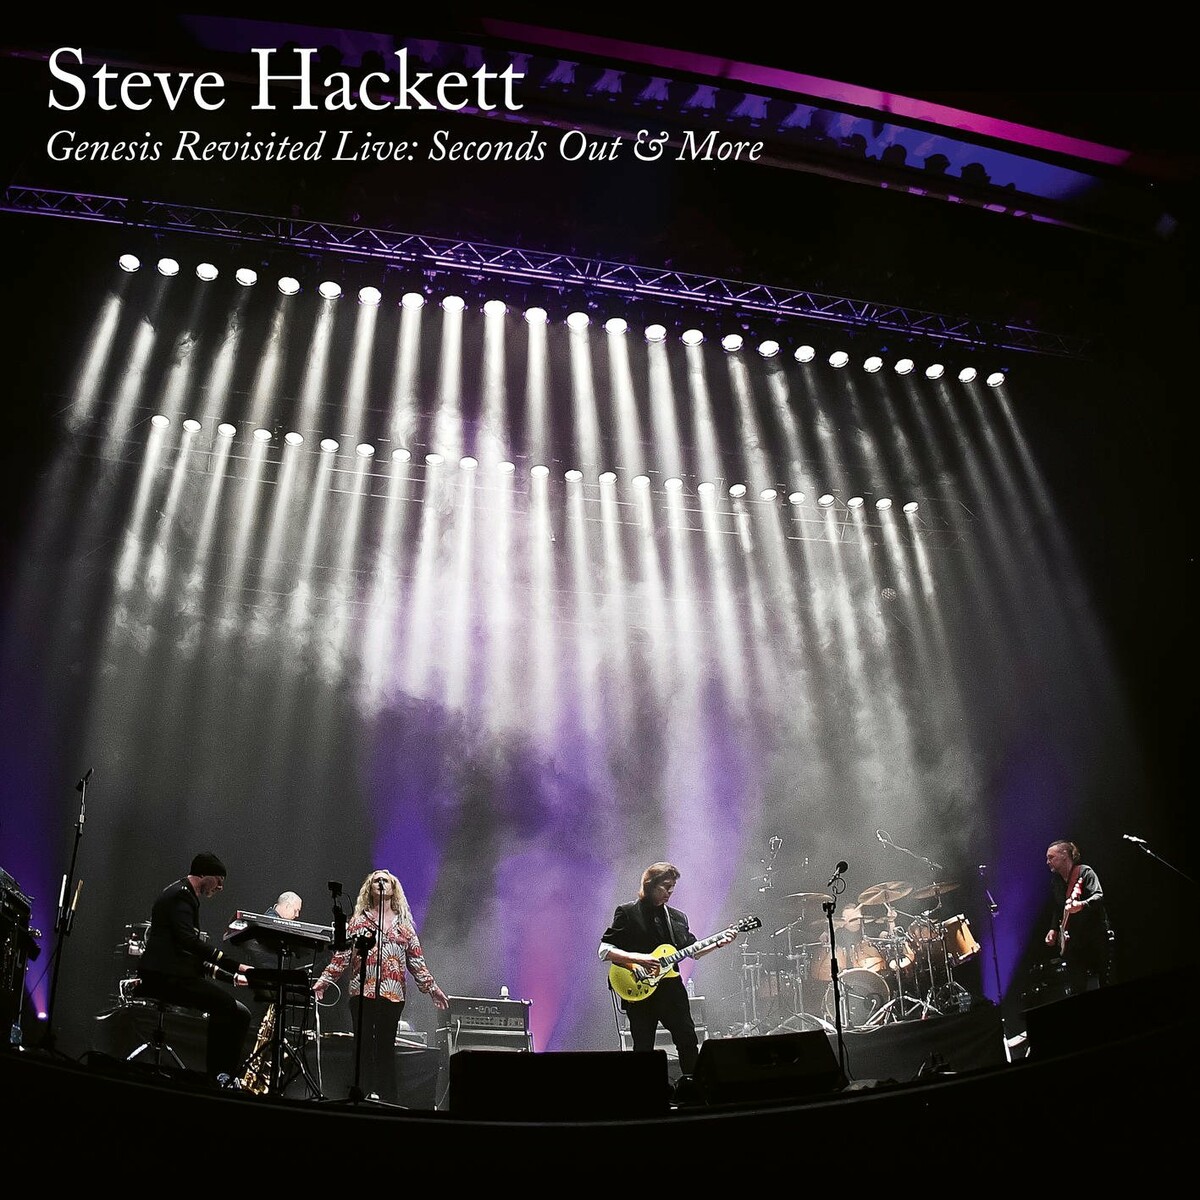 Steve Hackett - Genesis Revisited Live Seconds Out & More